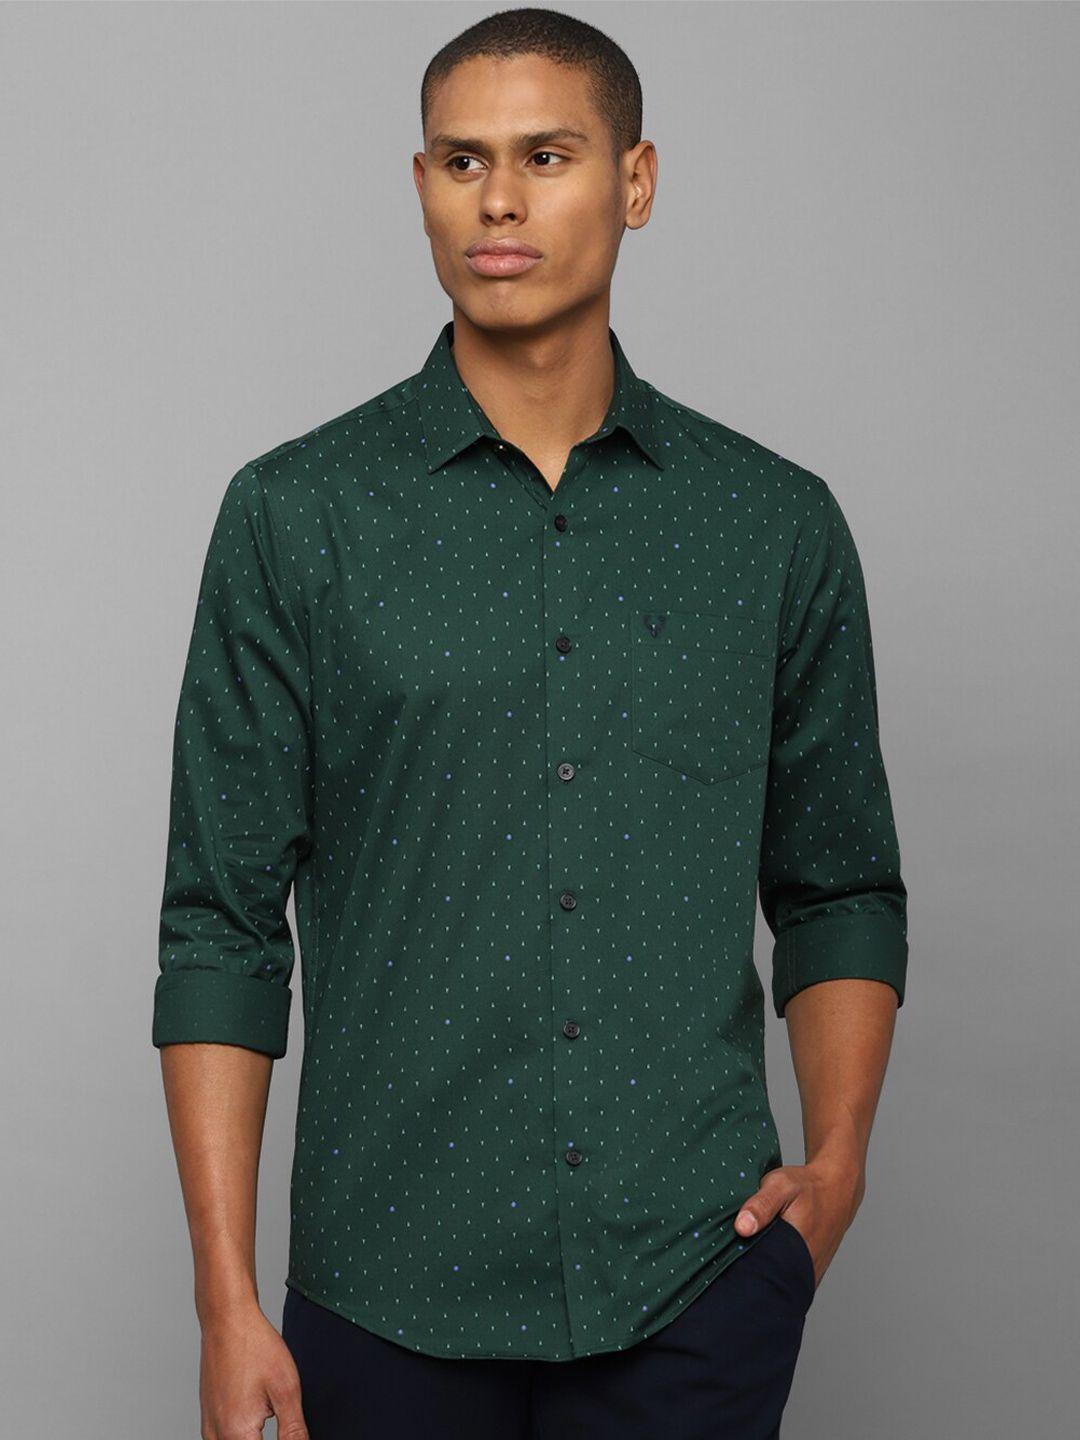 allen-solly-men-green-slim-fit-printed-casual-cotton-shirt